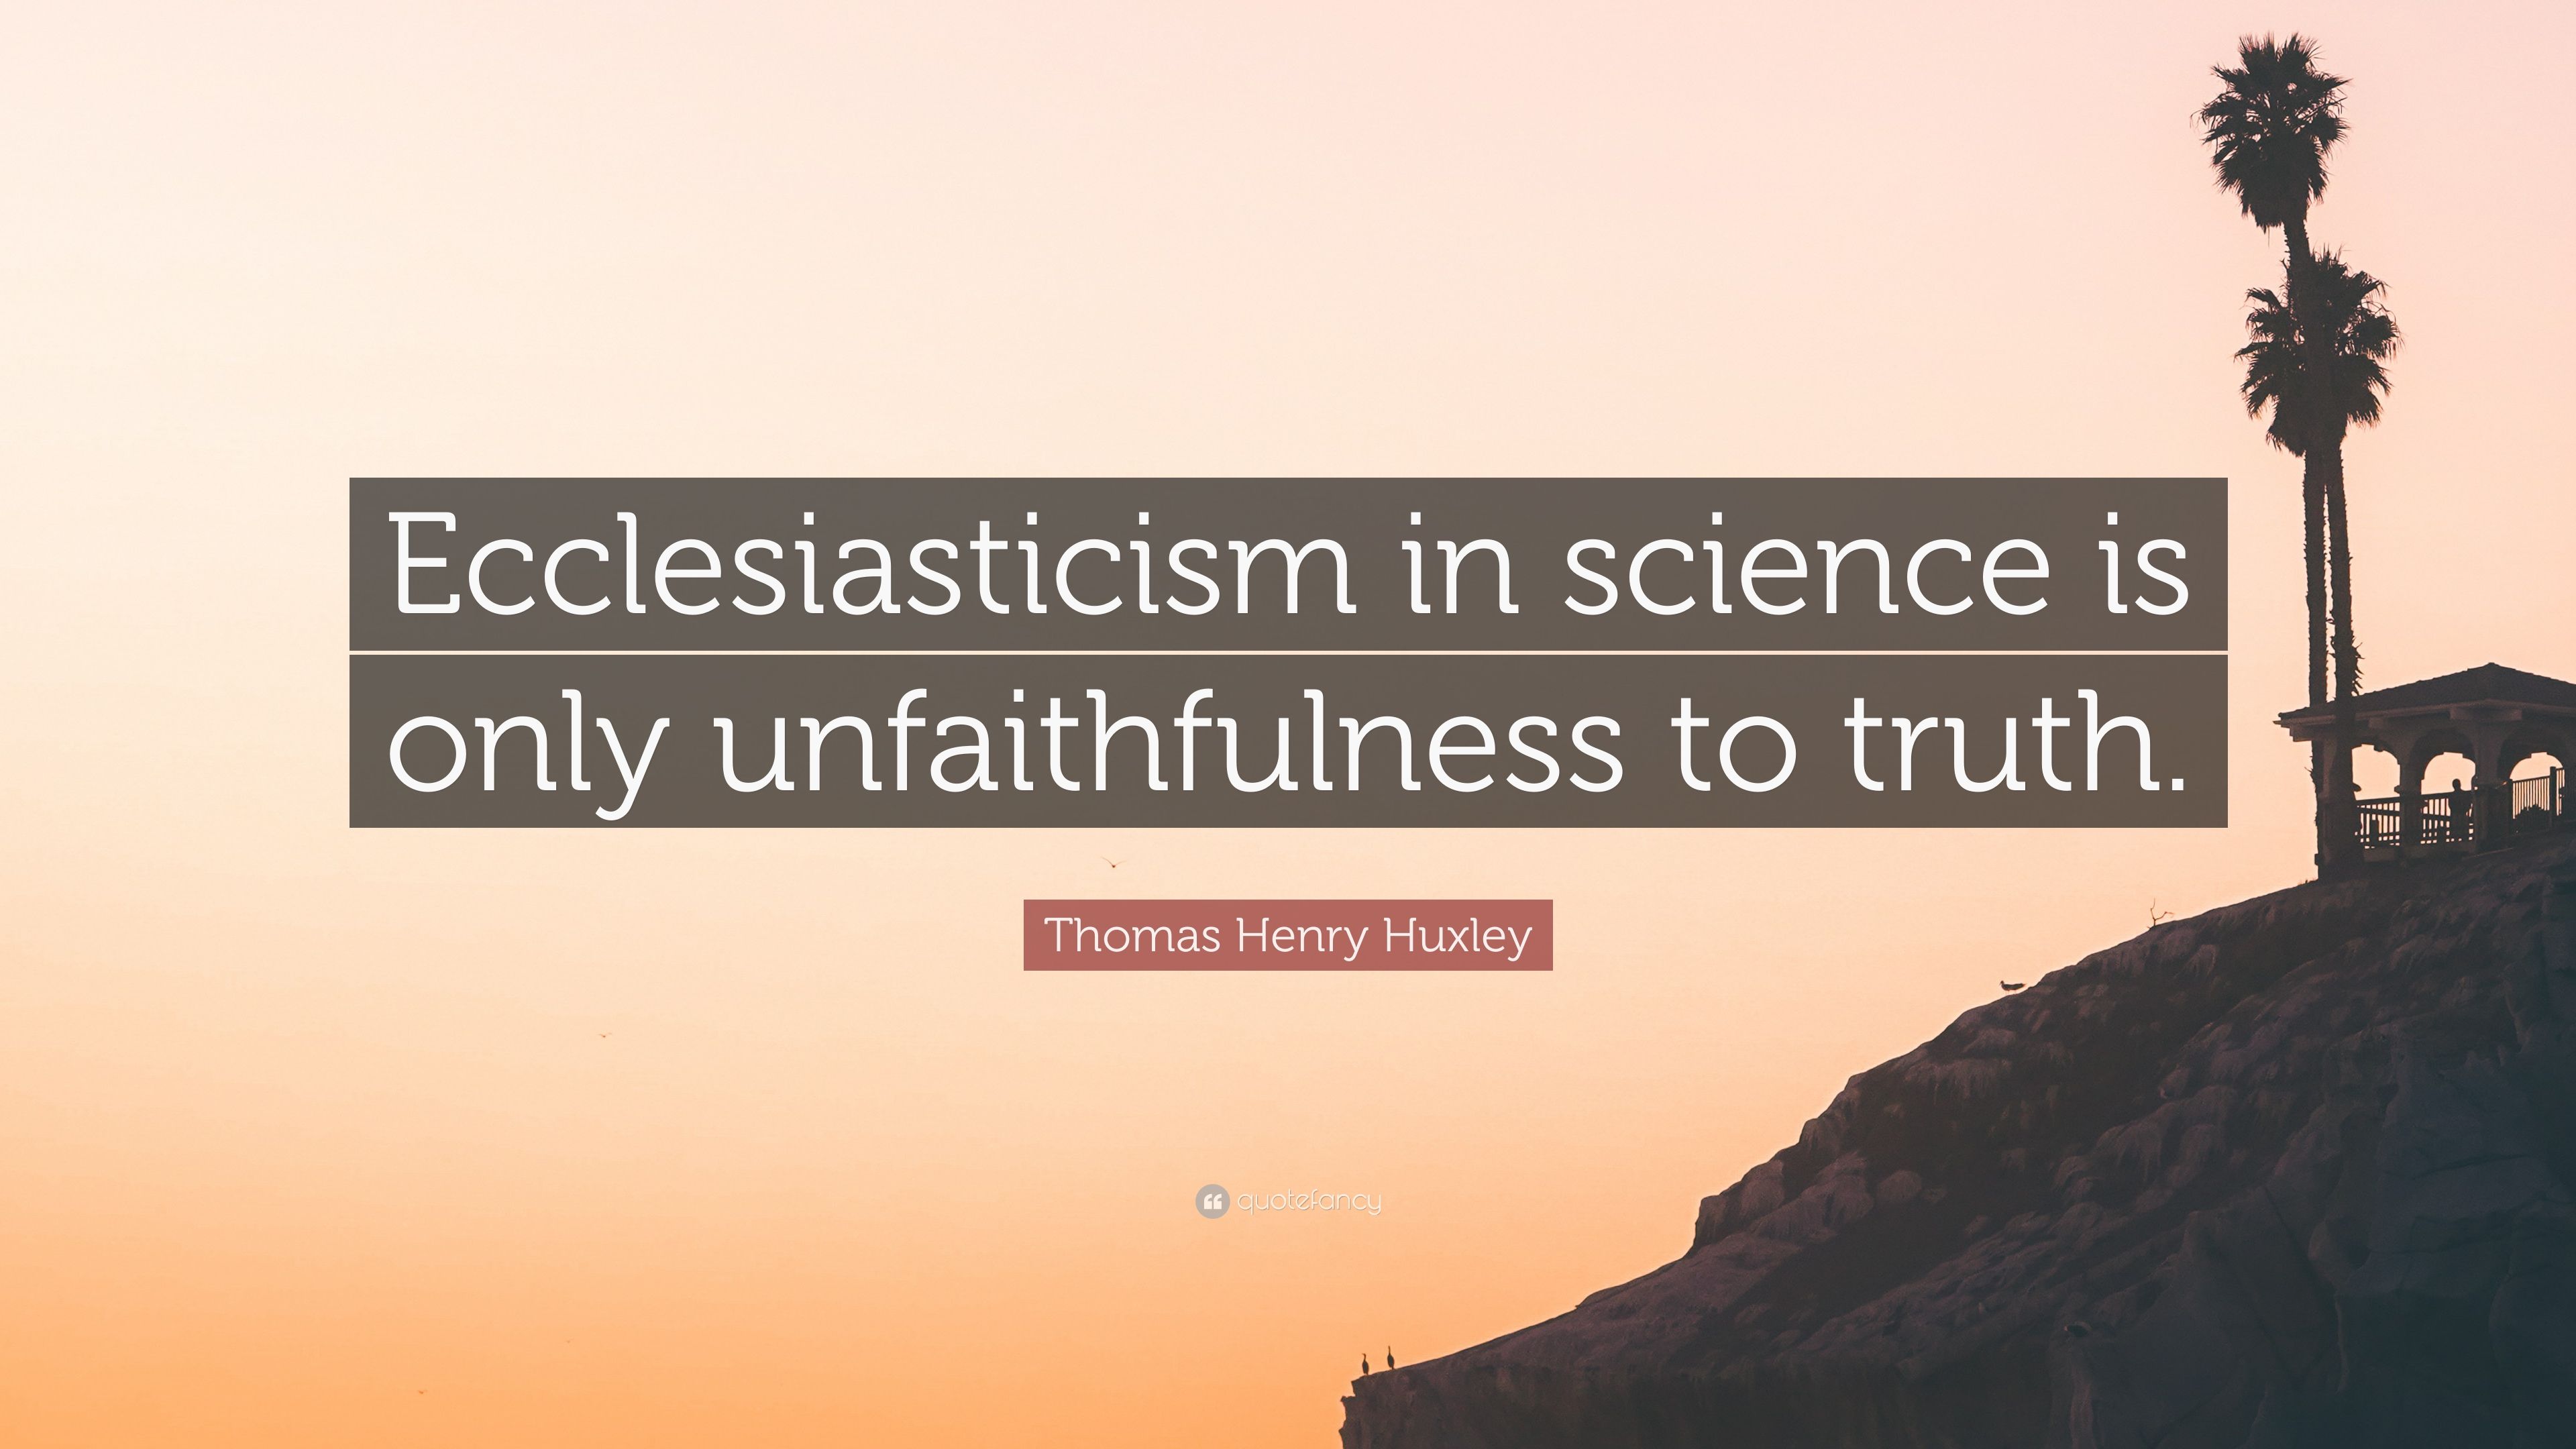 Thomas Henry Huxley Quote: “Ecclesiasticism in science is only  unfaithfulness to truth.”